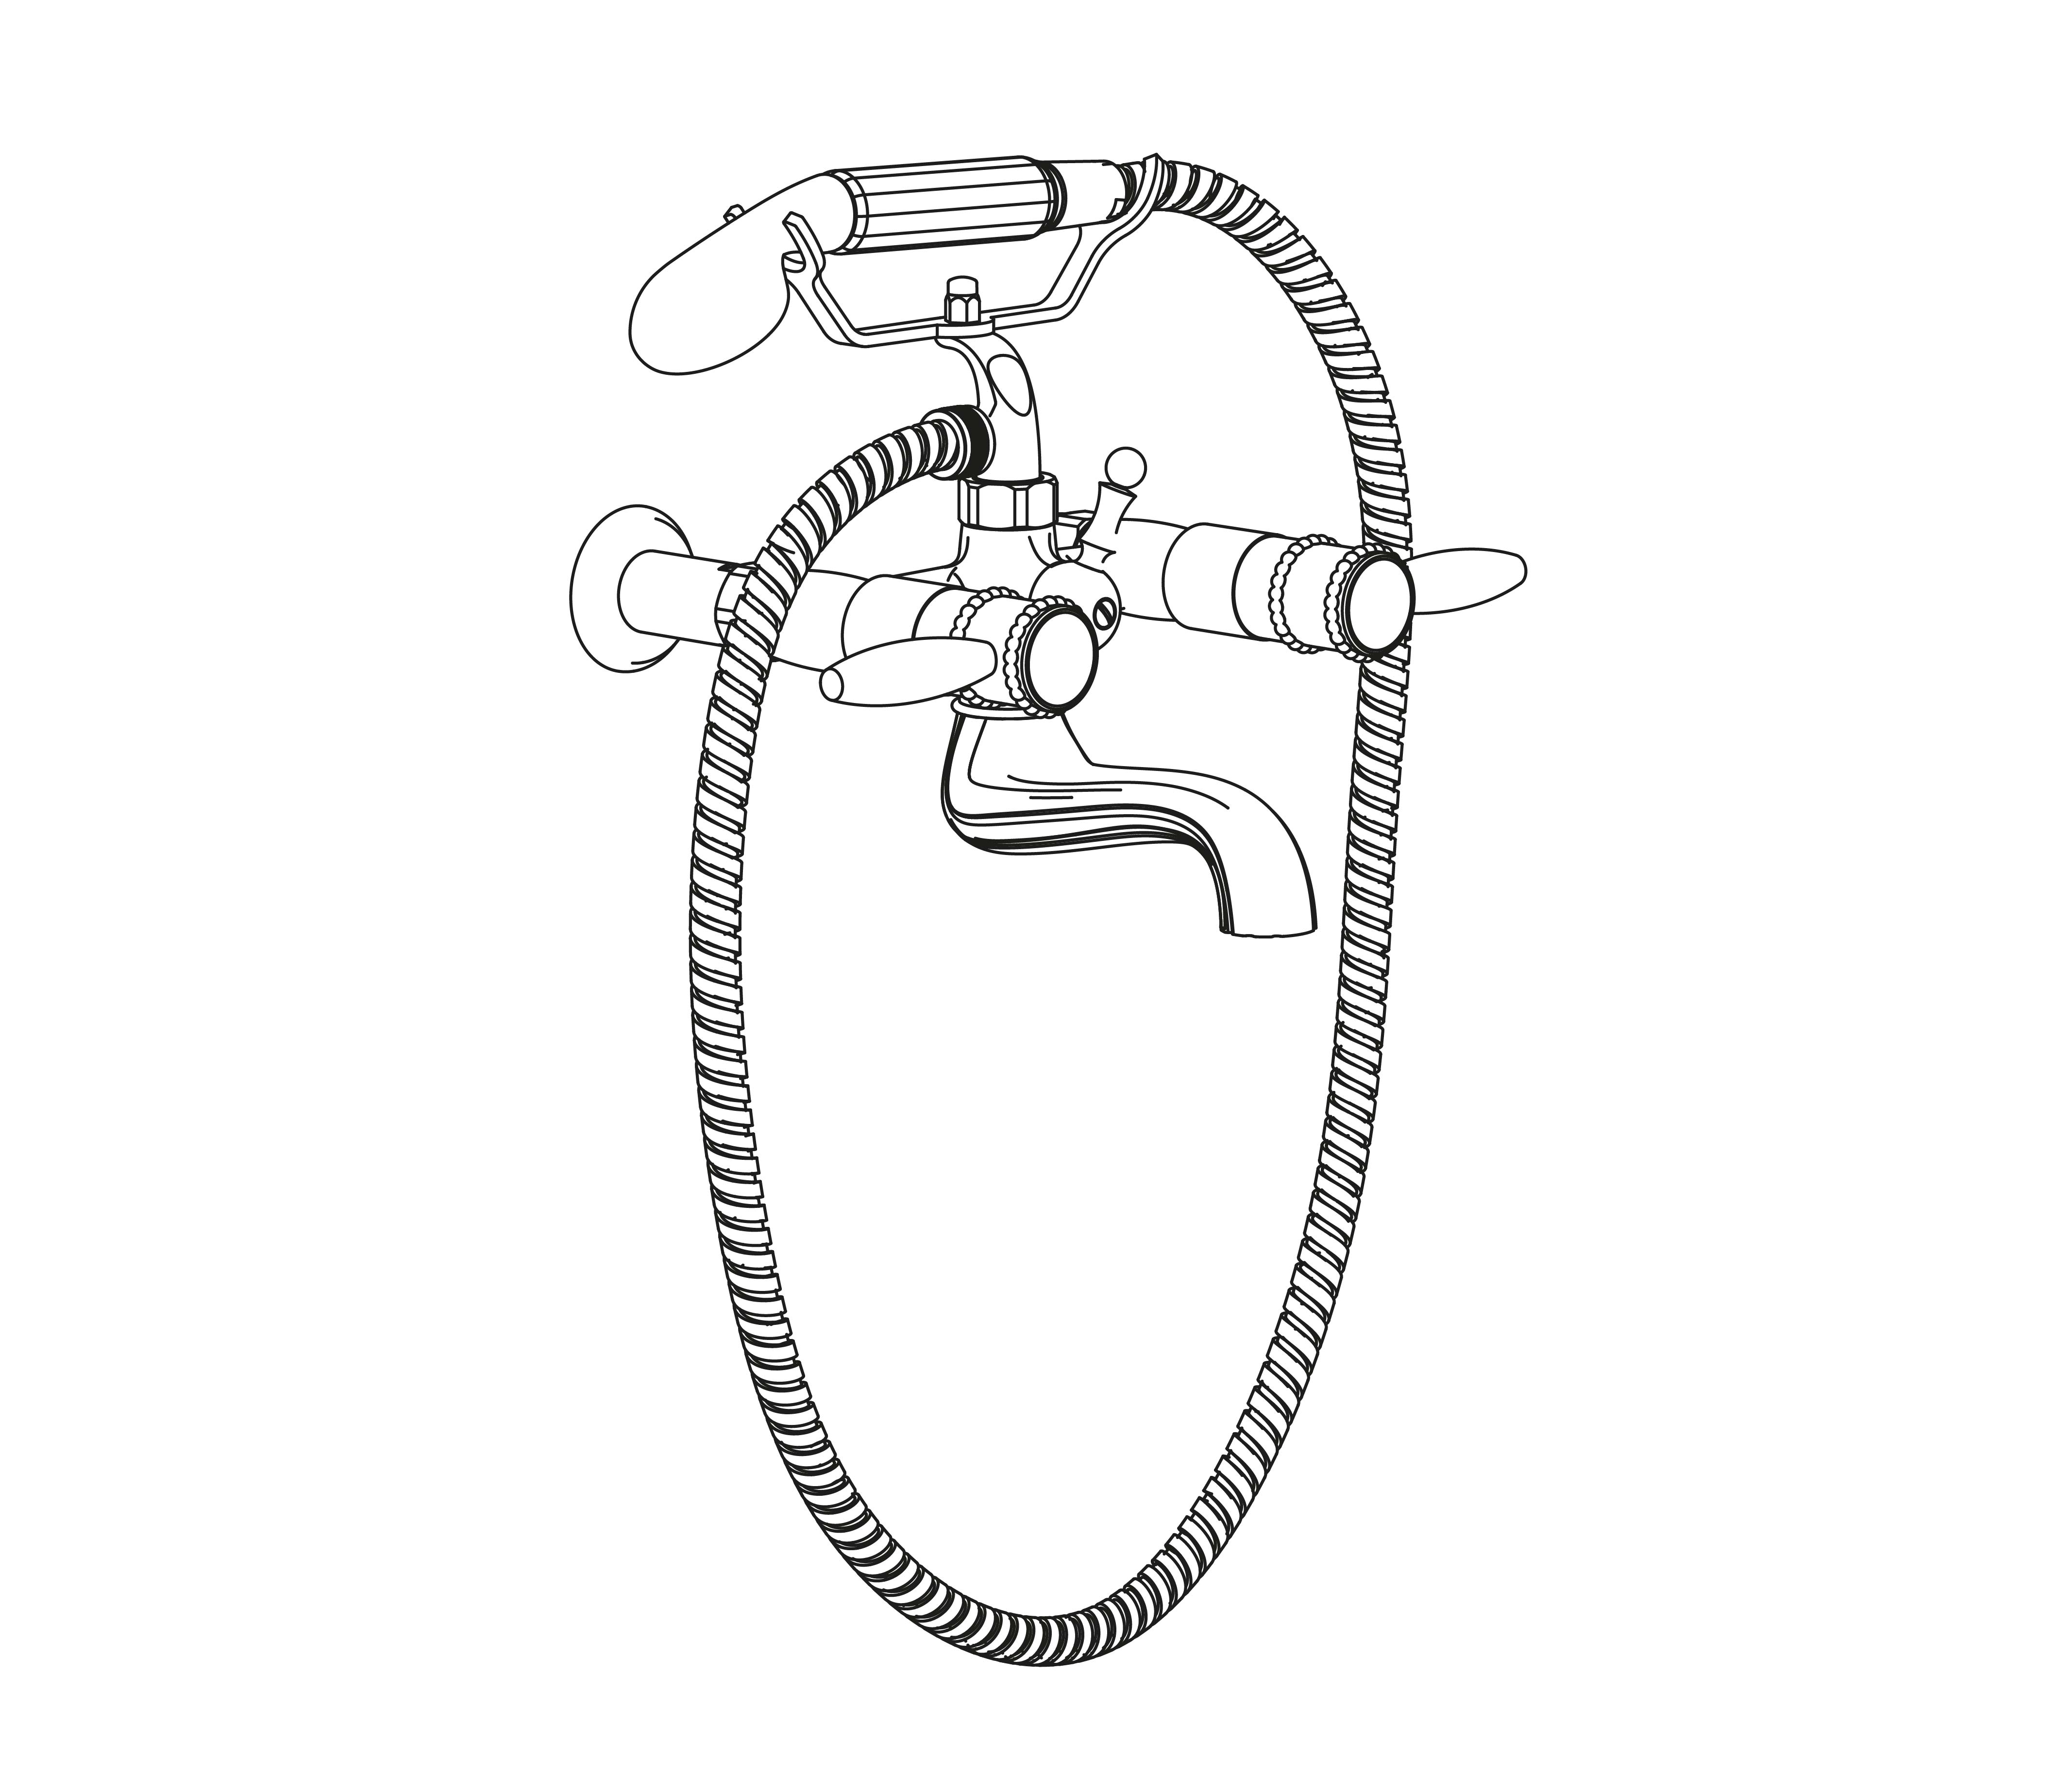 C66-3201 Wall mounted bath and shower mixer